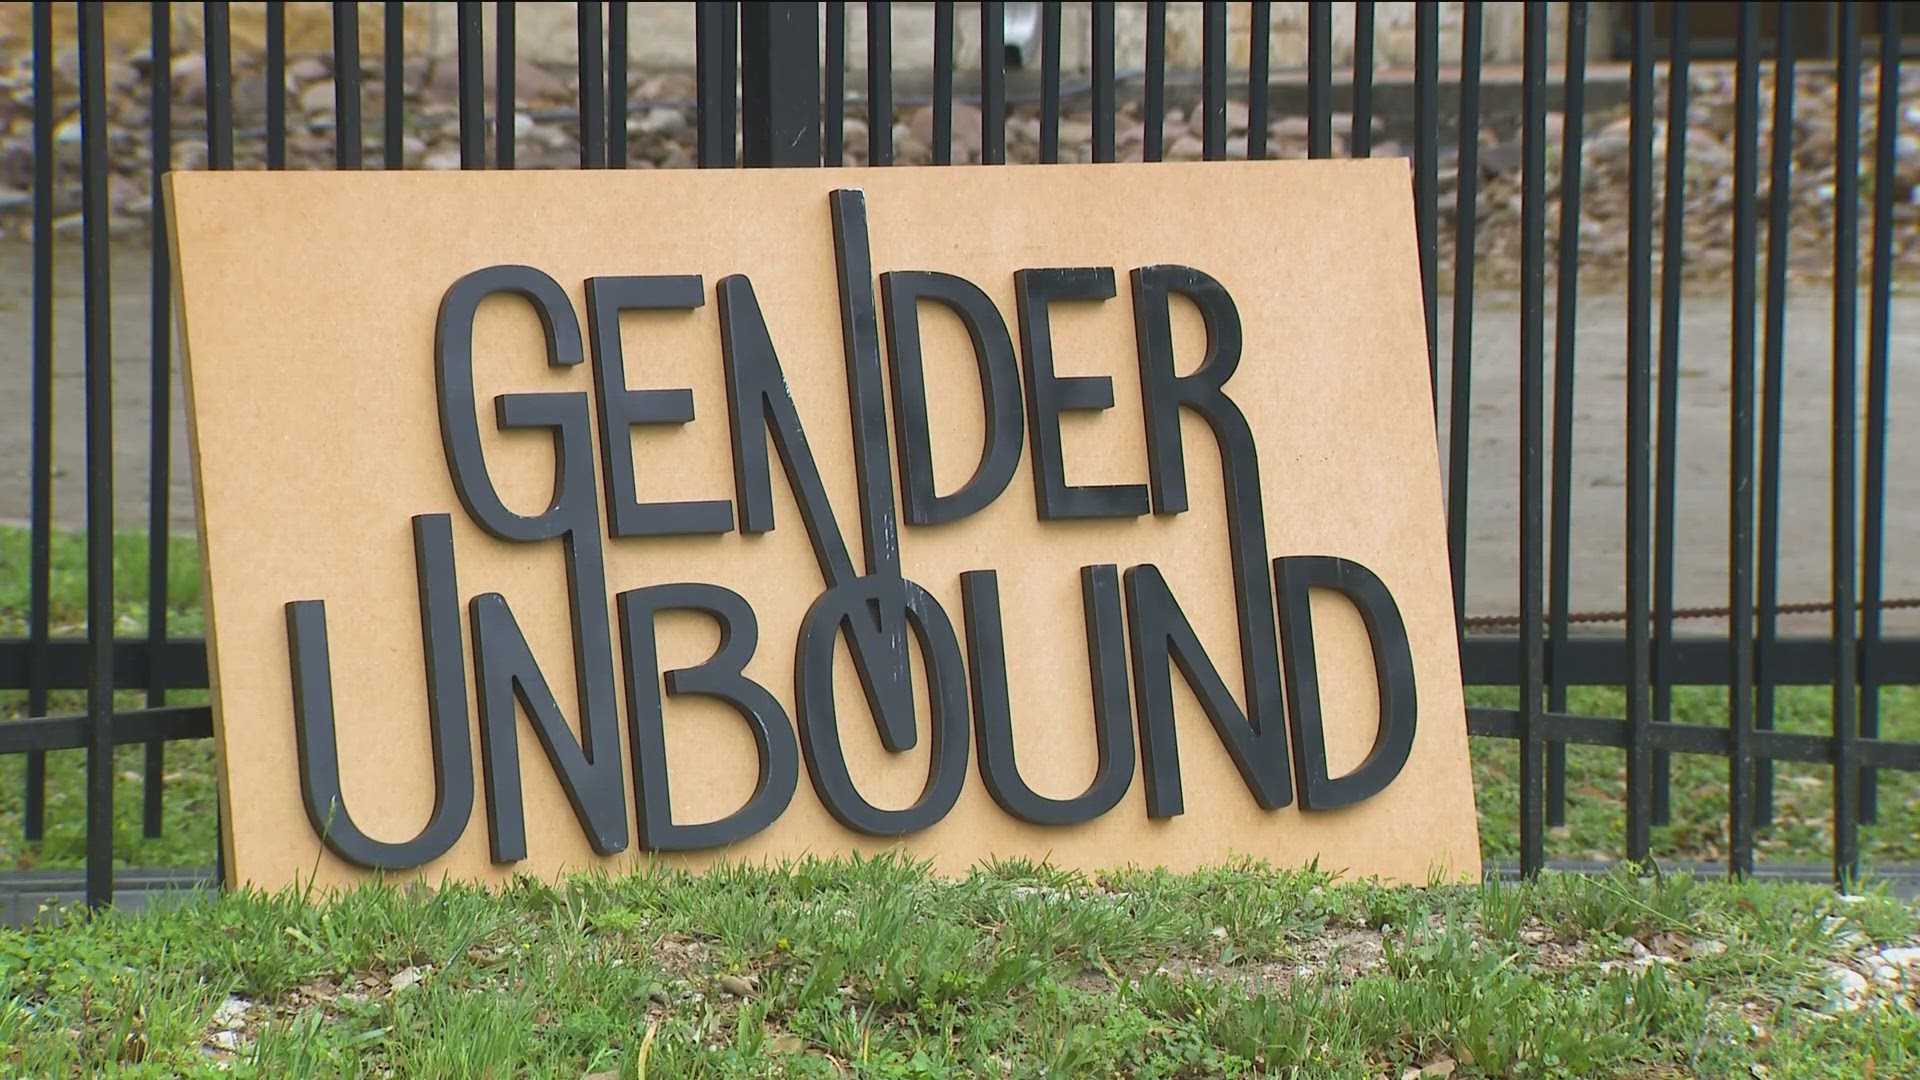 The community picnic, hosted by Gender Unbound, comes on the heels of a landmark decision that involves gender-affirming care on transgender youth in Texas.